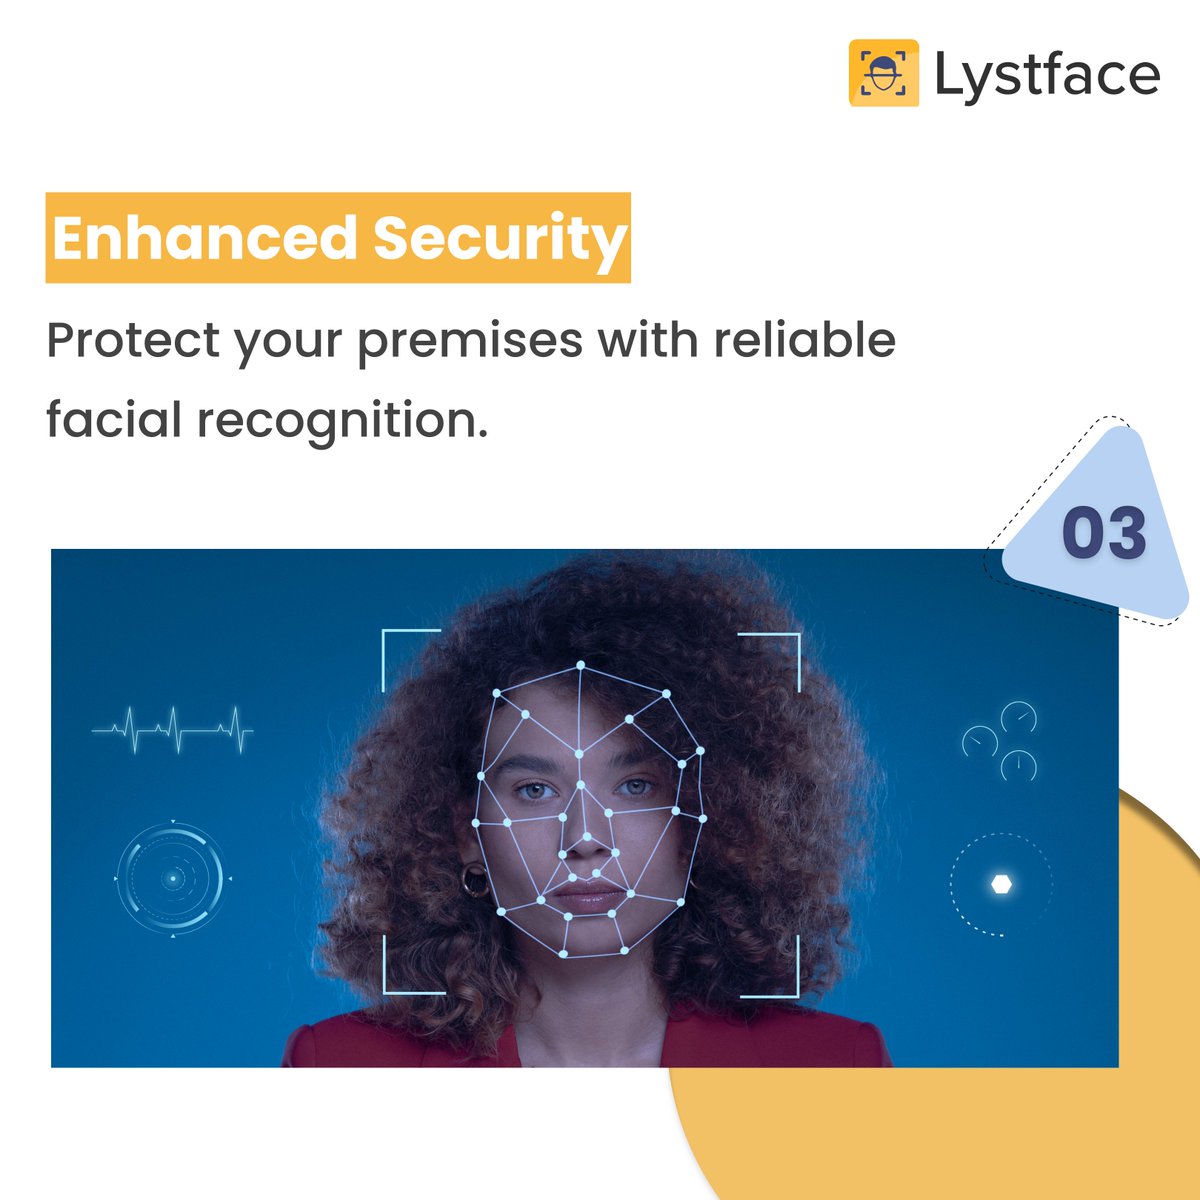 Unlock Efficiency, Integration, and Security with Lystface! ✅

#lystface #work #growth #gamechanger #facerecognition #attendance #monitoring #tracking #management #employeetracking #officeattendance #employee #twitter #TwitterX